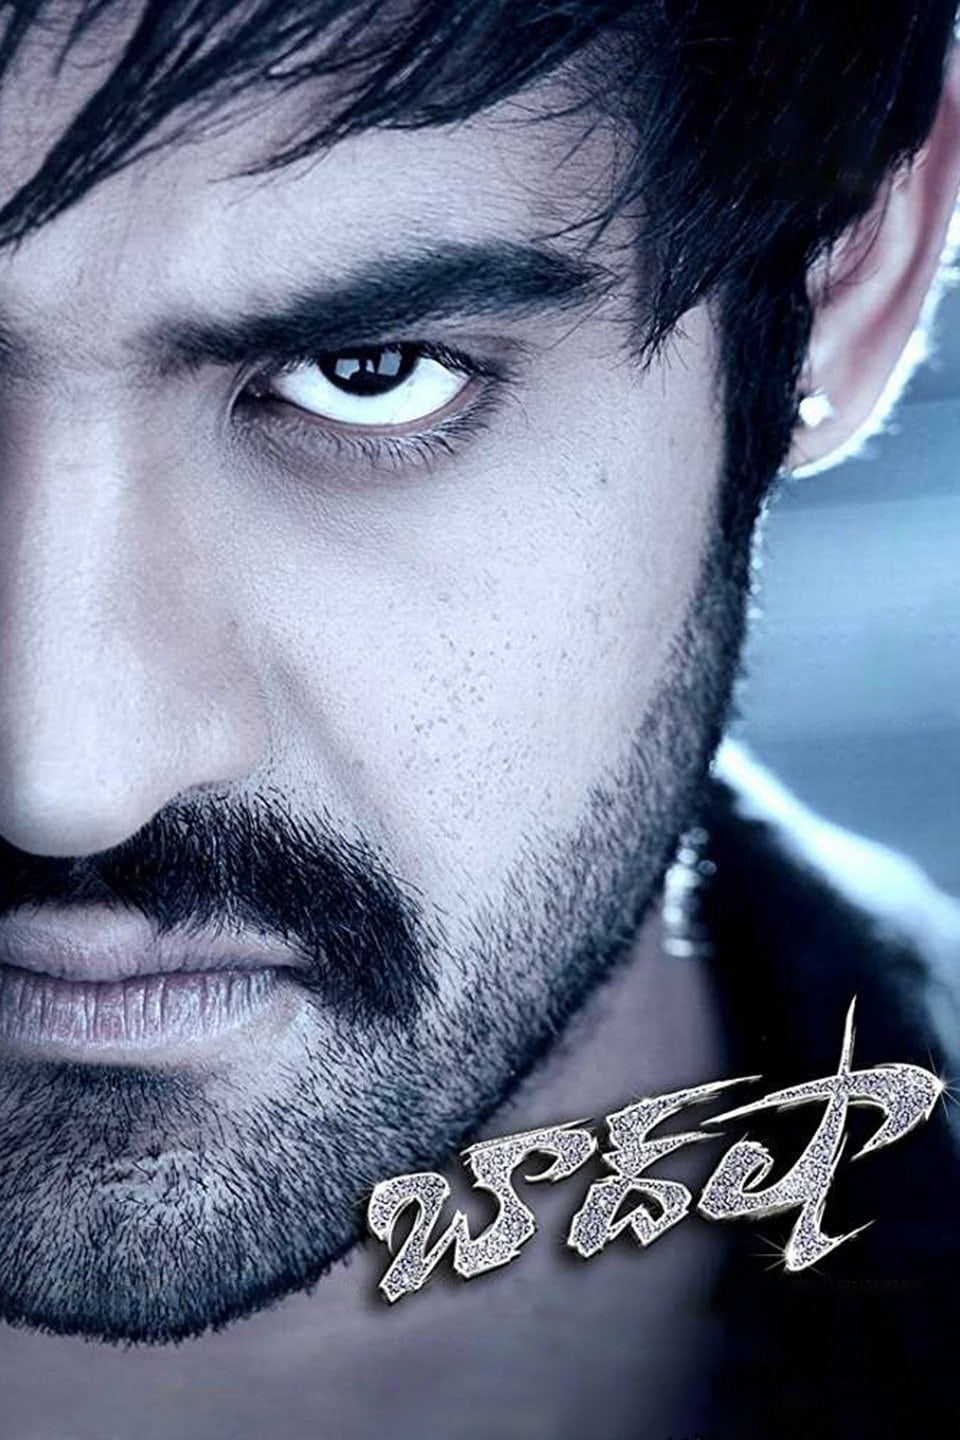 Poster for the movie "Baadshah"